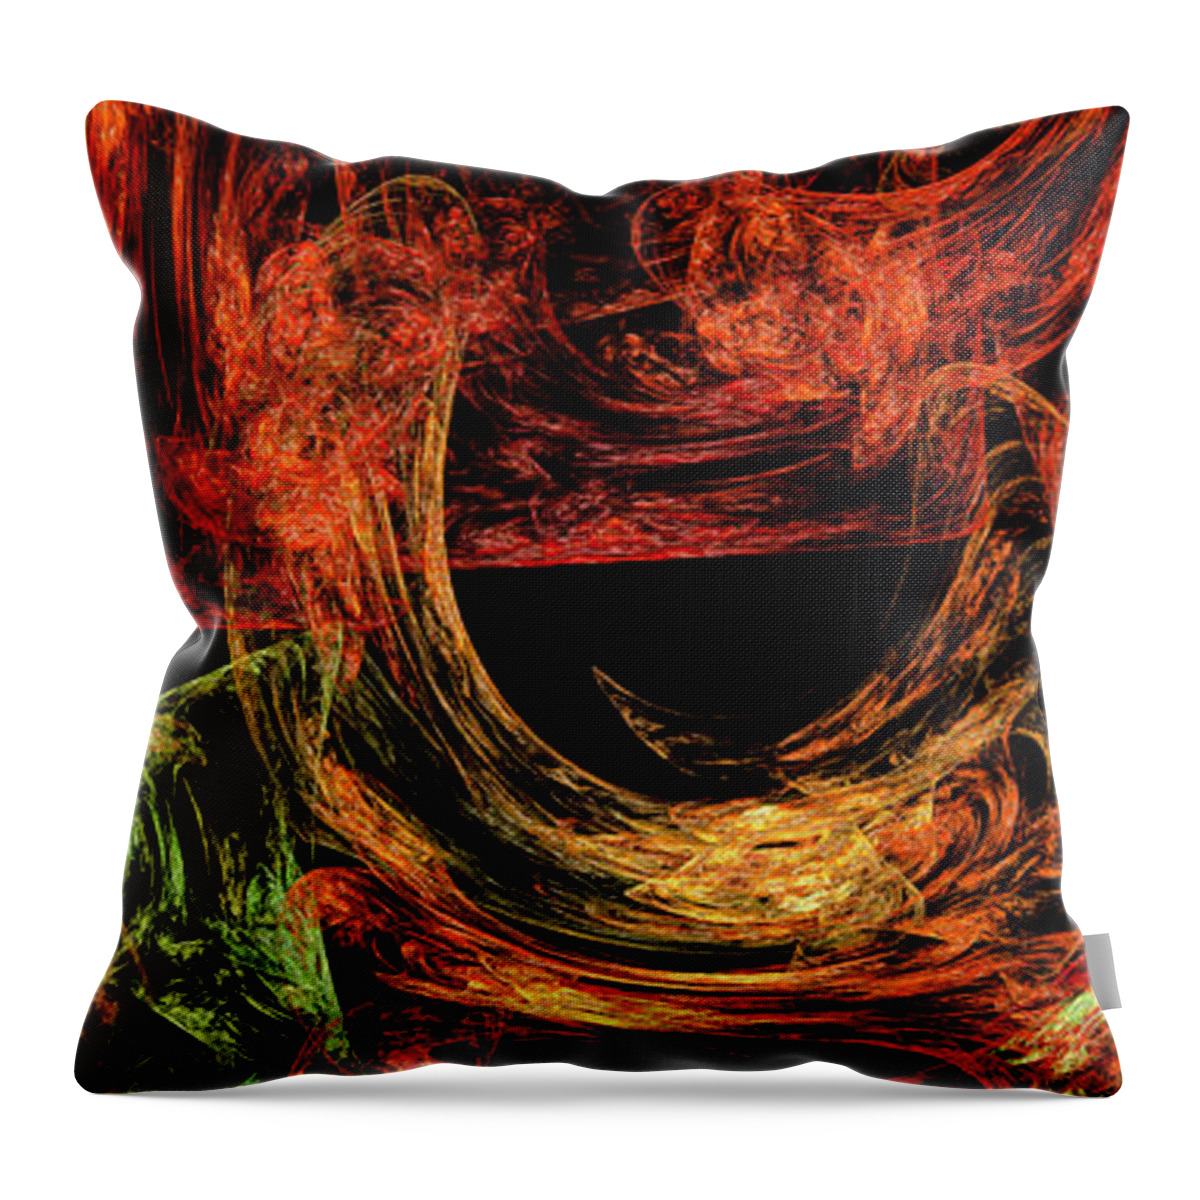 Abstract Throw Pillow featuring the digital art Flight To Oz by Andee Design